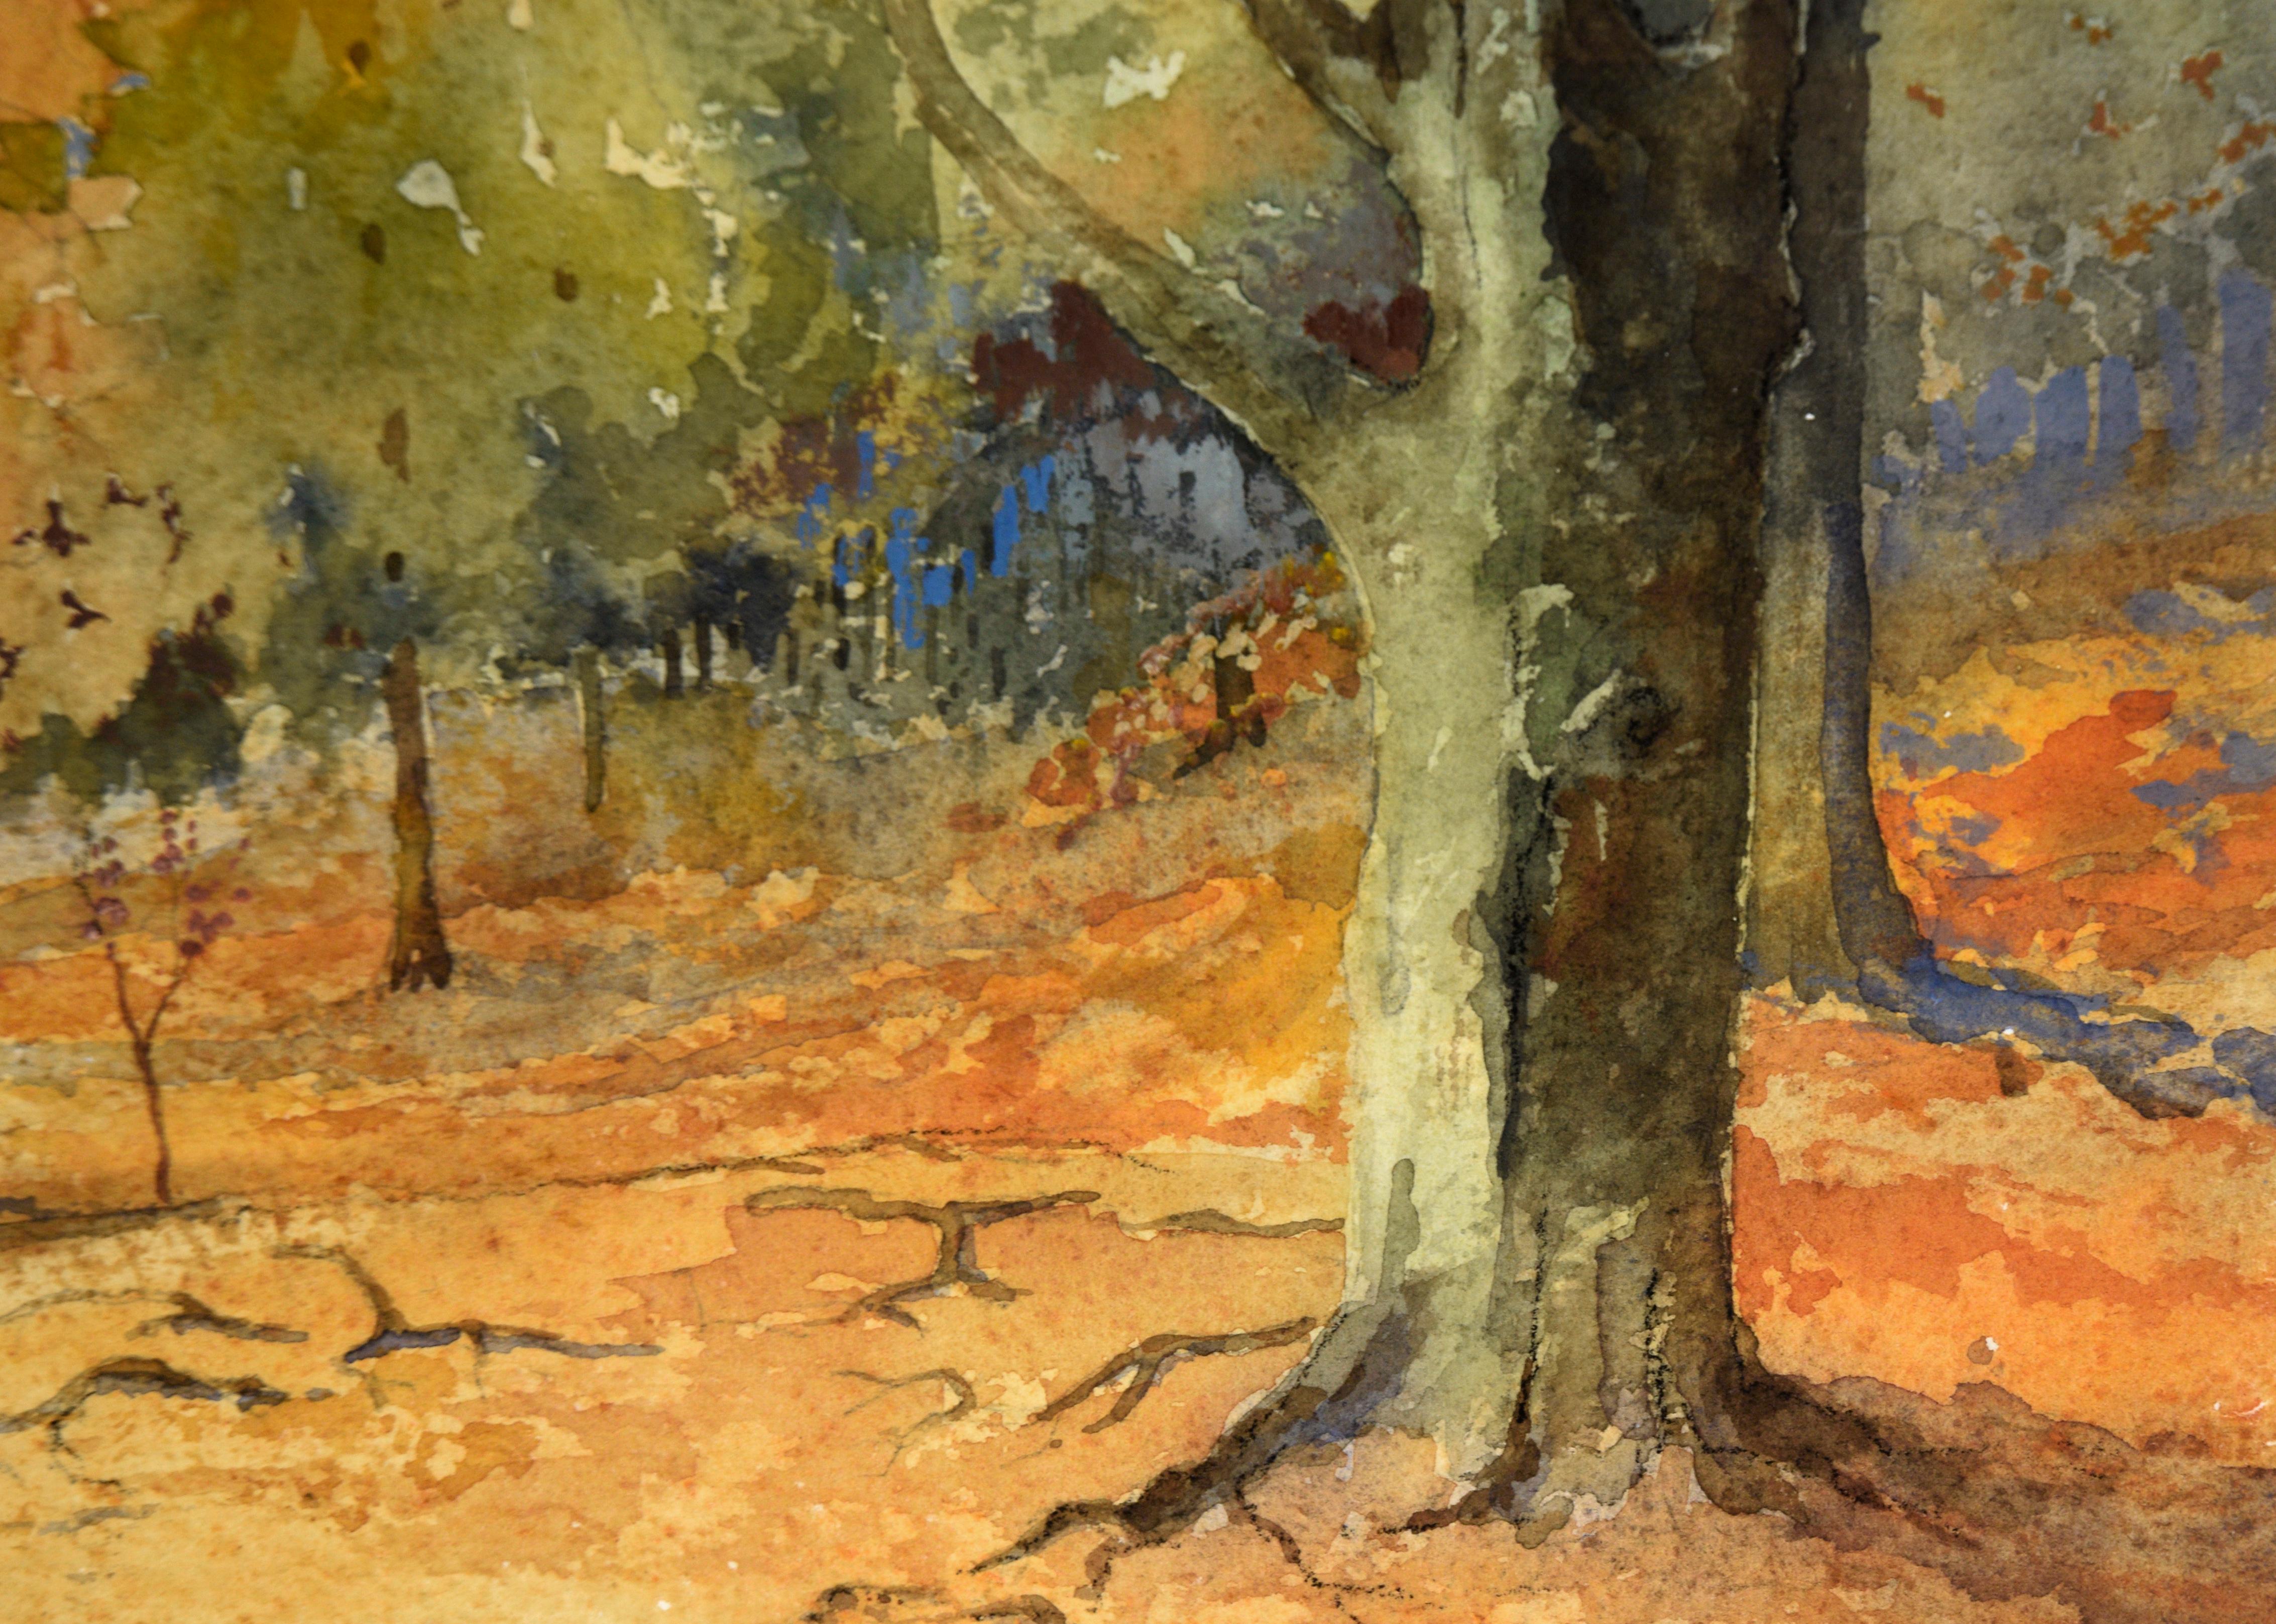 Queensdown Warren, Kent - Autumn Forest Interior Landscape in Watercolor

Colorful forest landscape by L.B.H. Cremer (20th Century). Layers of color create a deep forest, full of orange, yellow, and green foliage. This piece balances impressionism